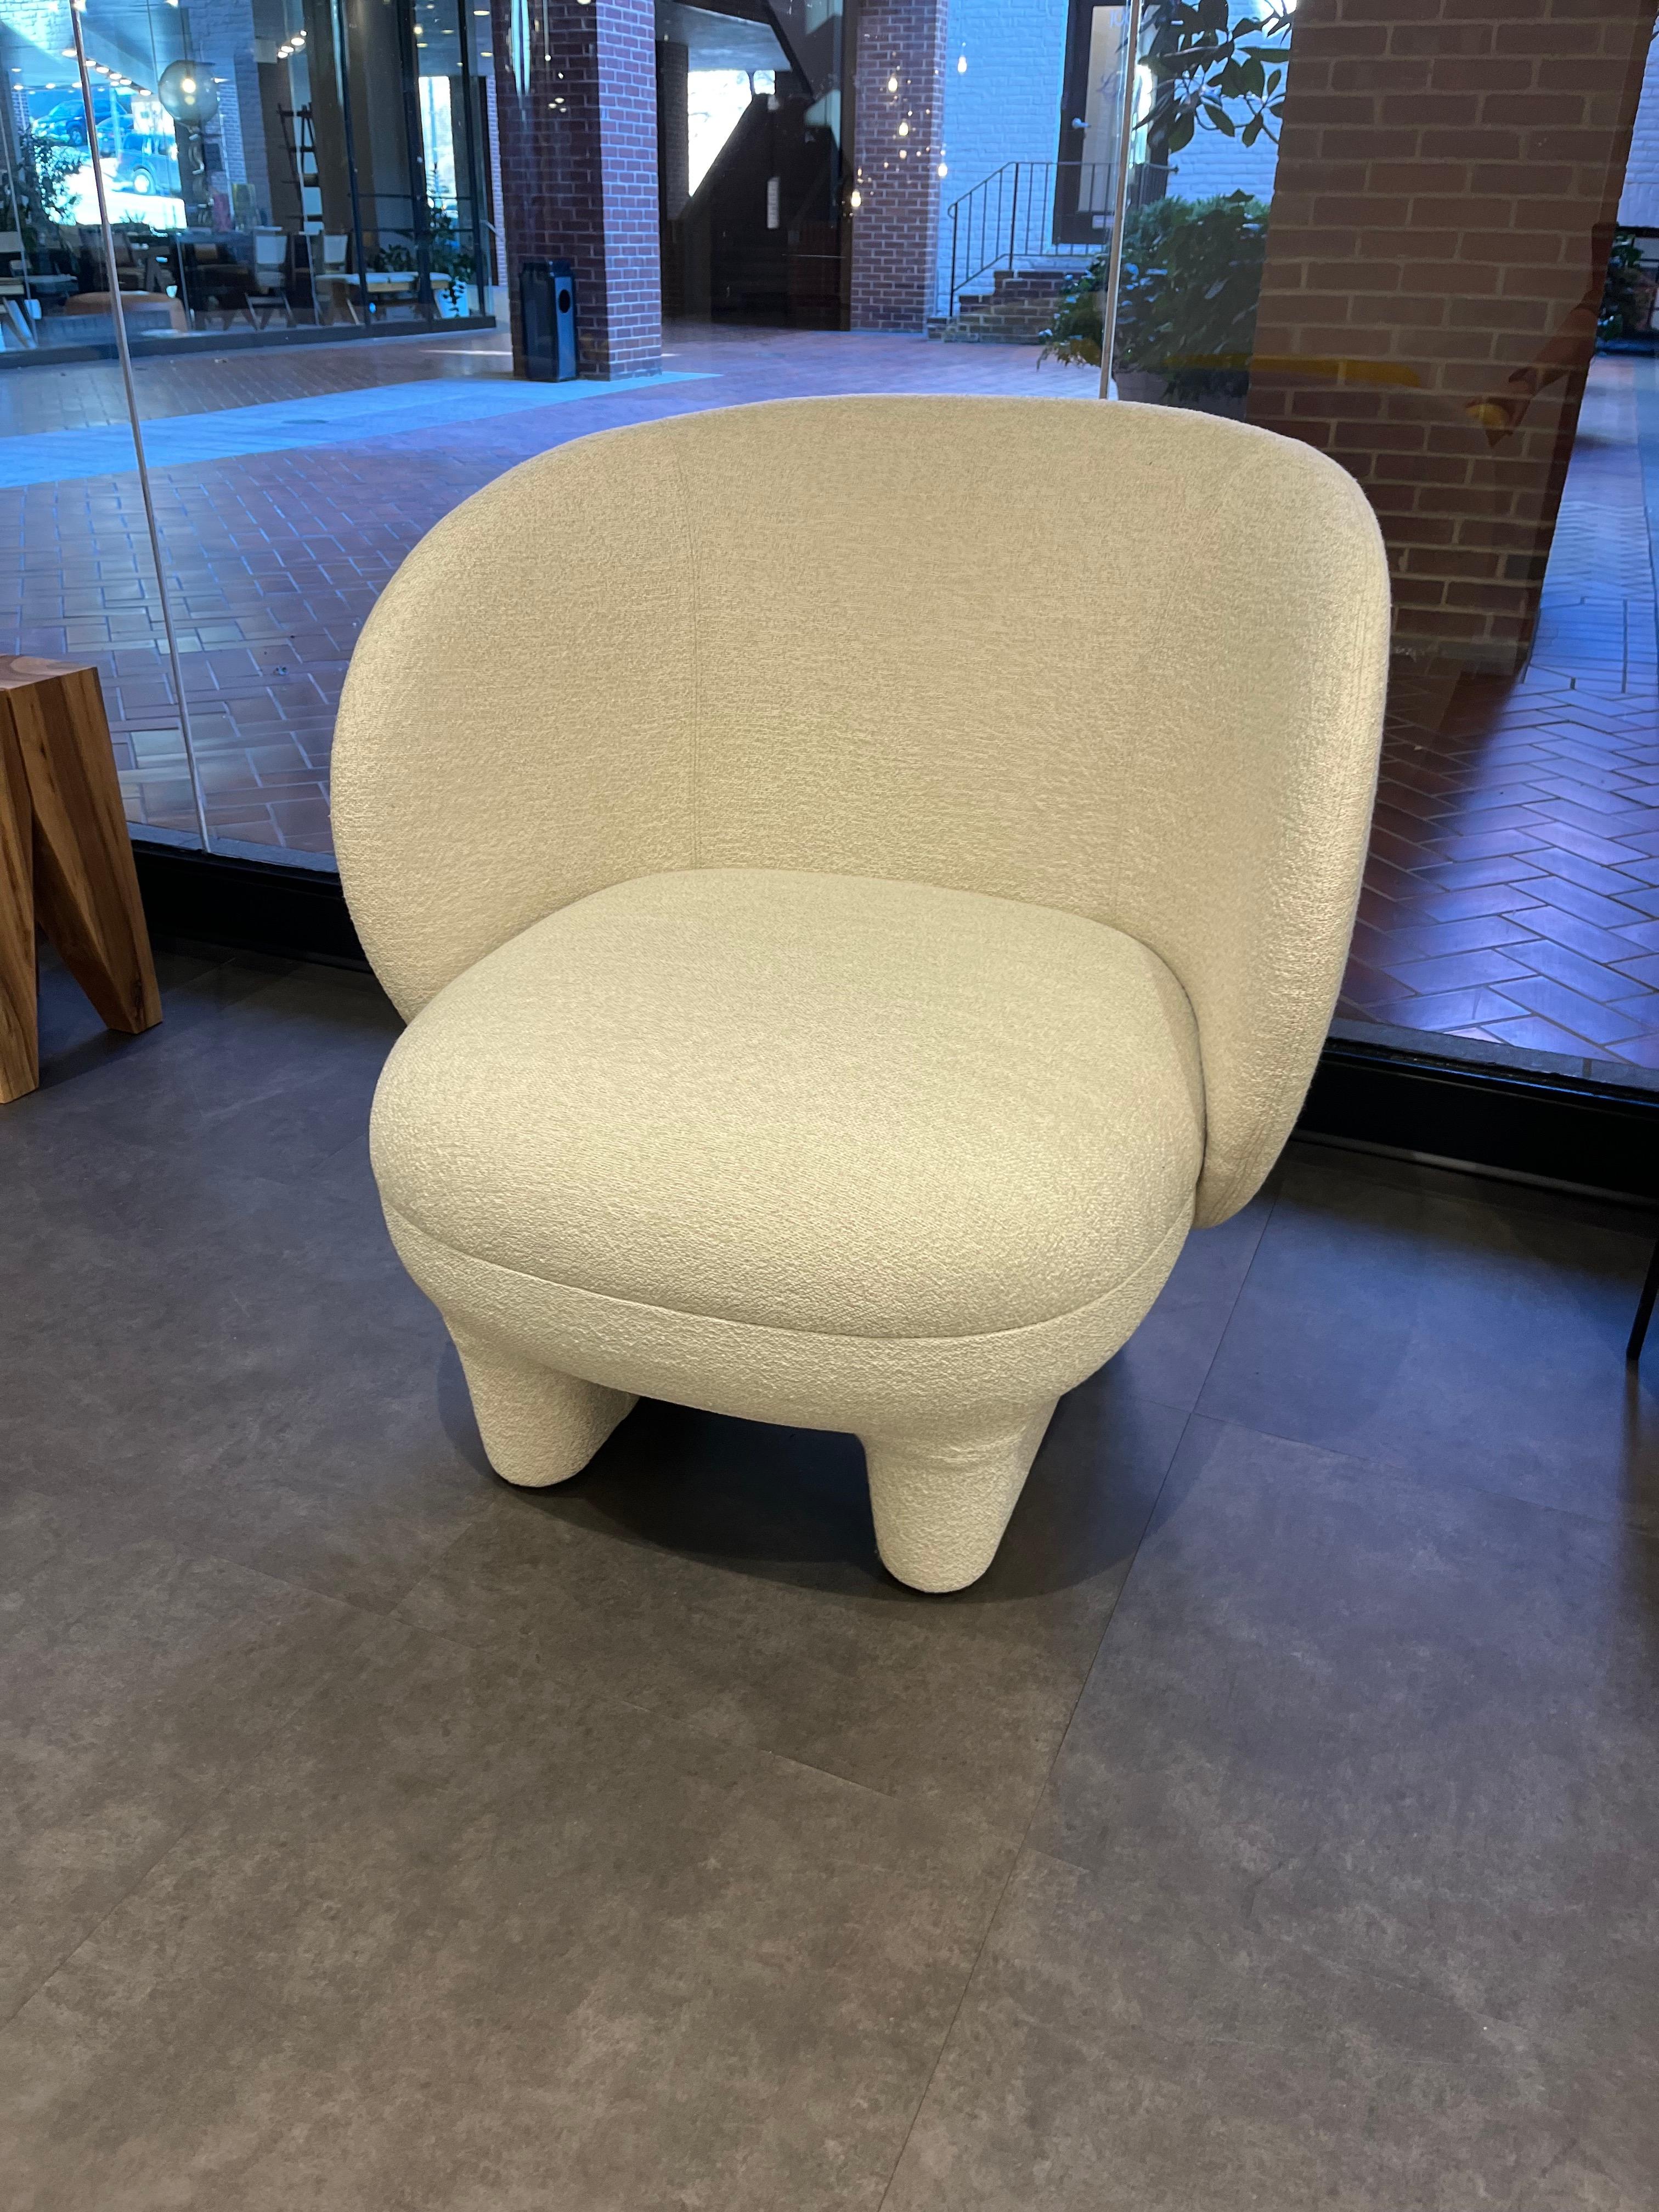 upholstered in rubelli bianco cat 4.
Moro is a cosy cocoon of a chair. Named after a famous Venetian Doge, the design evokes the strong personality of an Italian palazzo’s lush interior. A warm and welcoming atmosphere that could never be